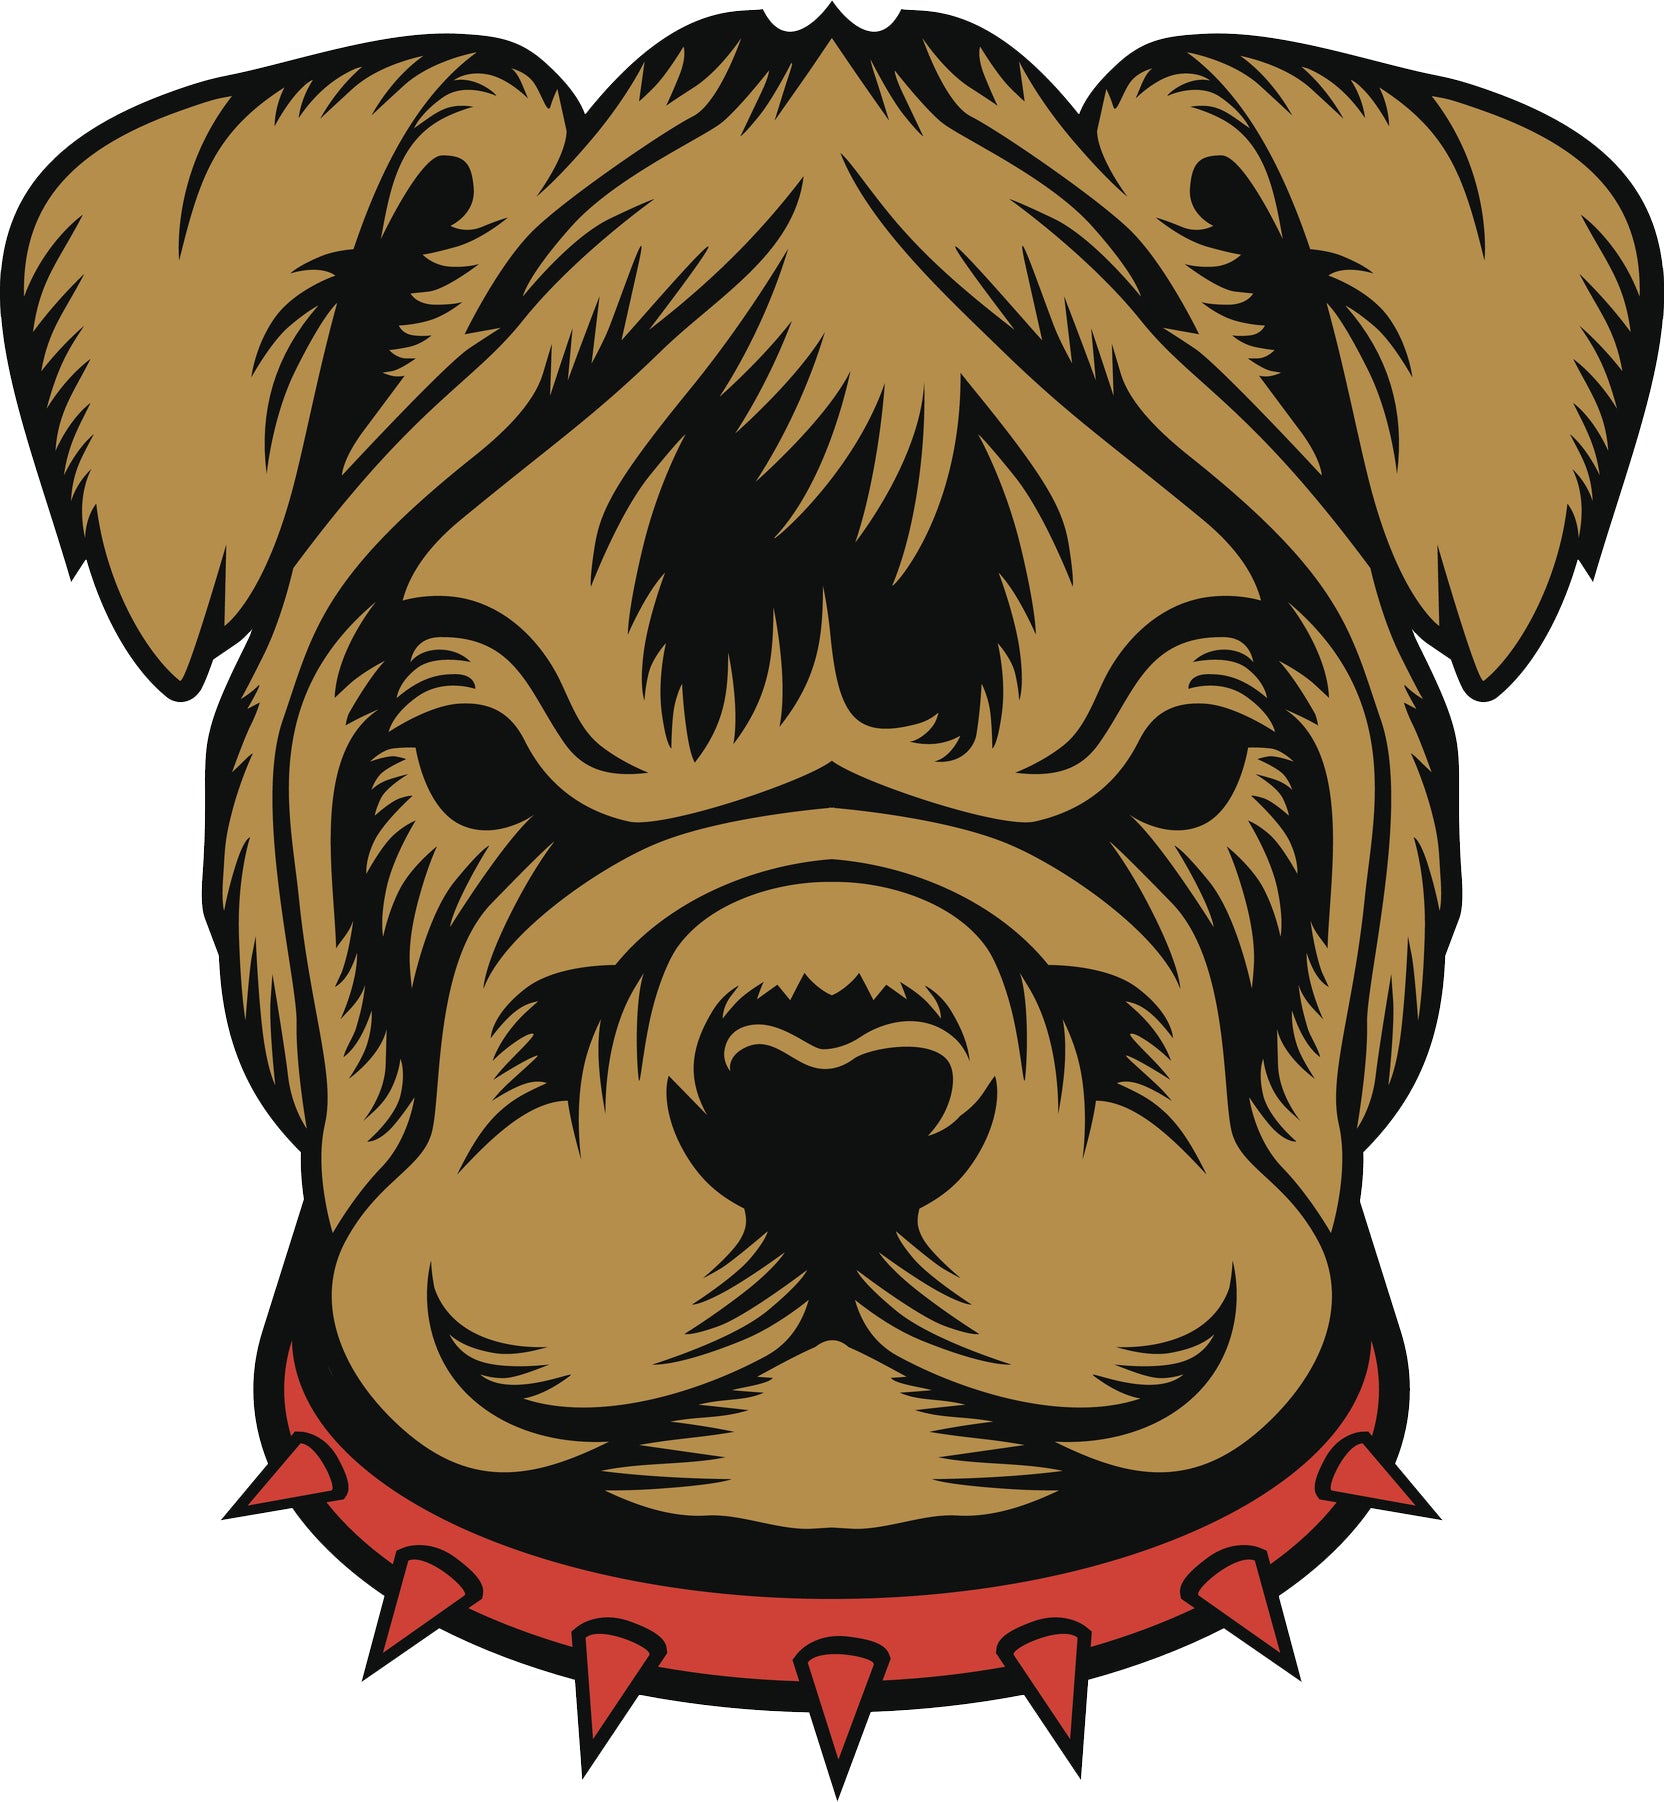 Brown and Black Bulldog Puppy with Red Collar Vinyl Decal Sticker